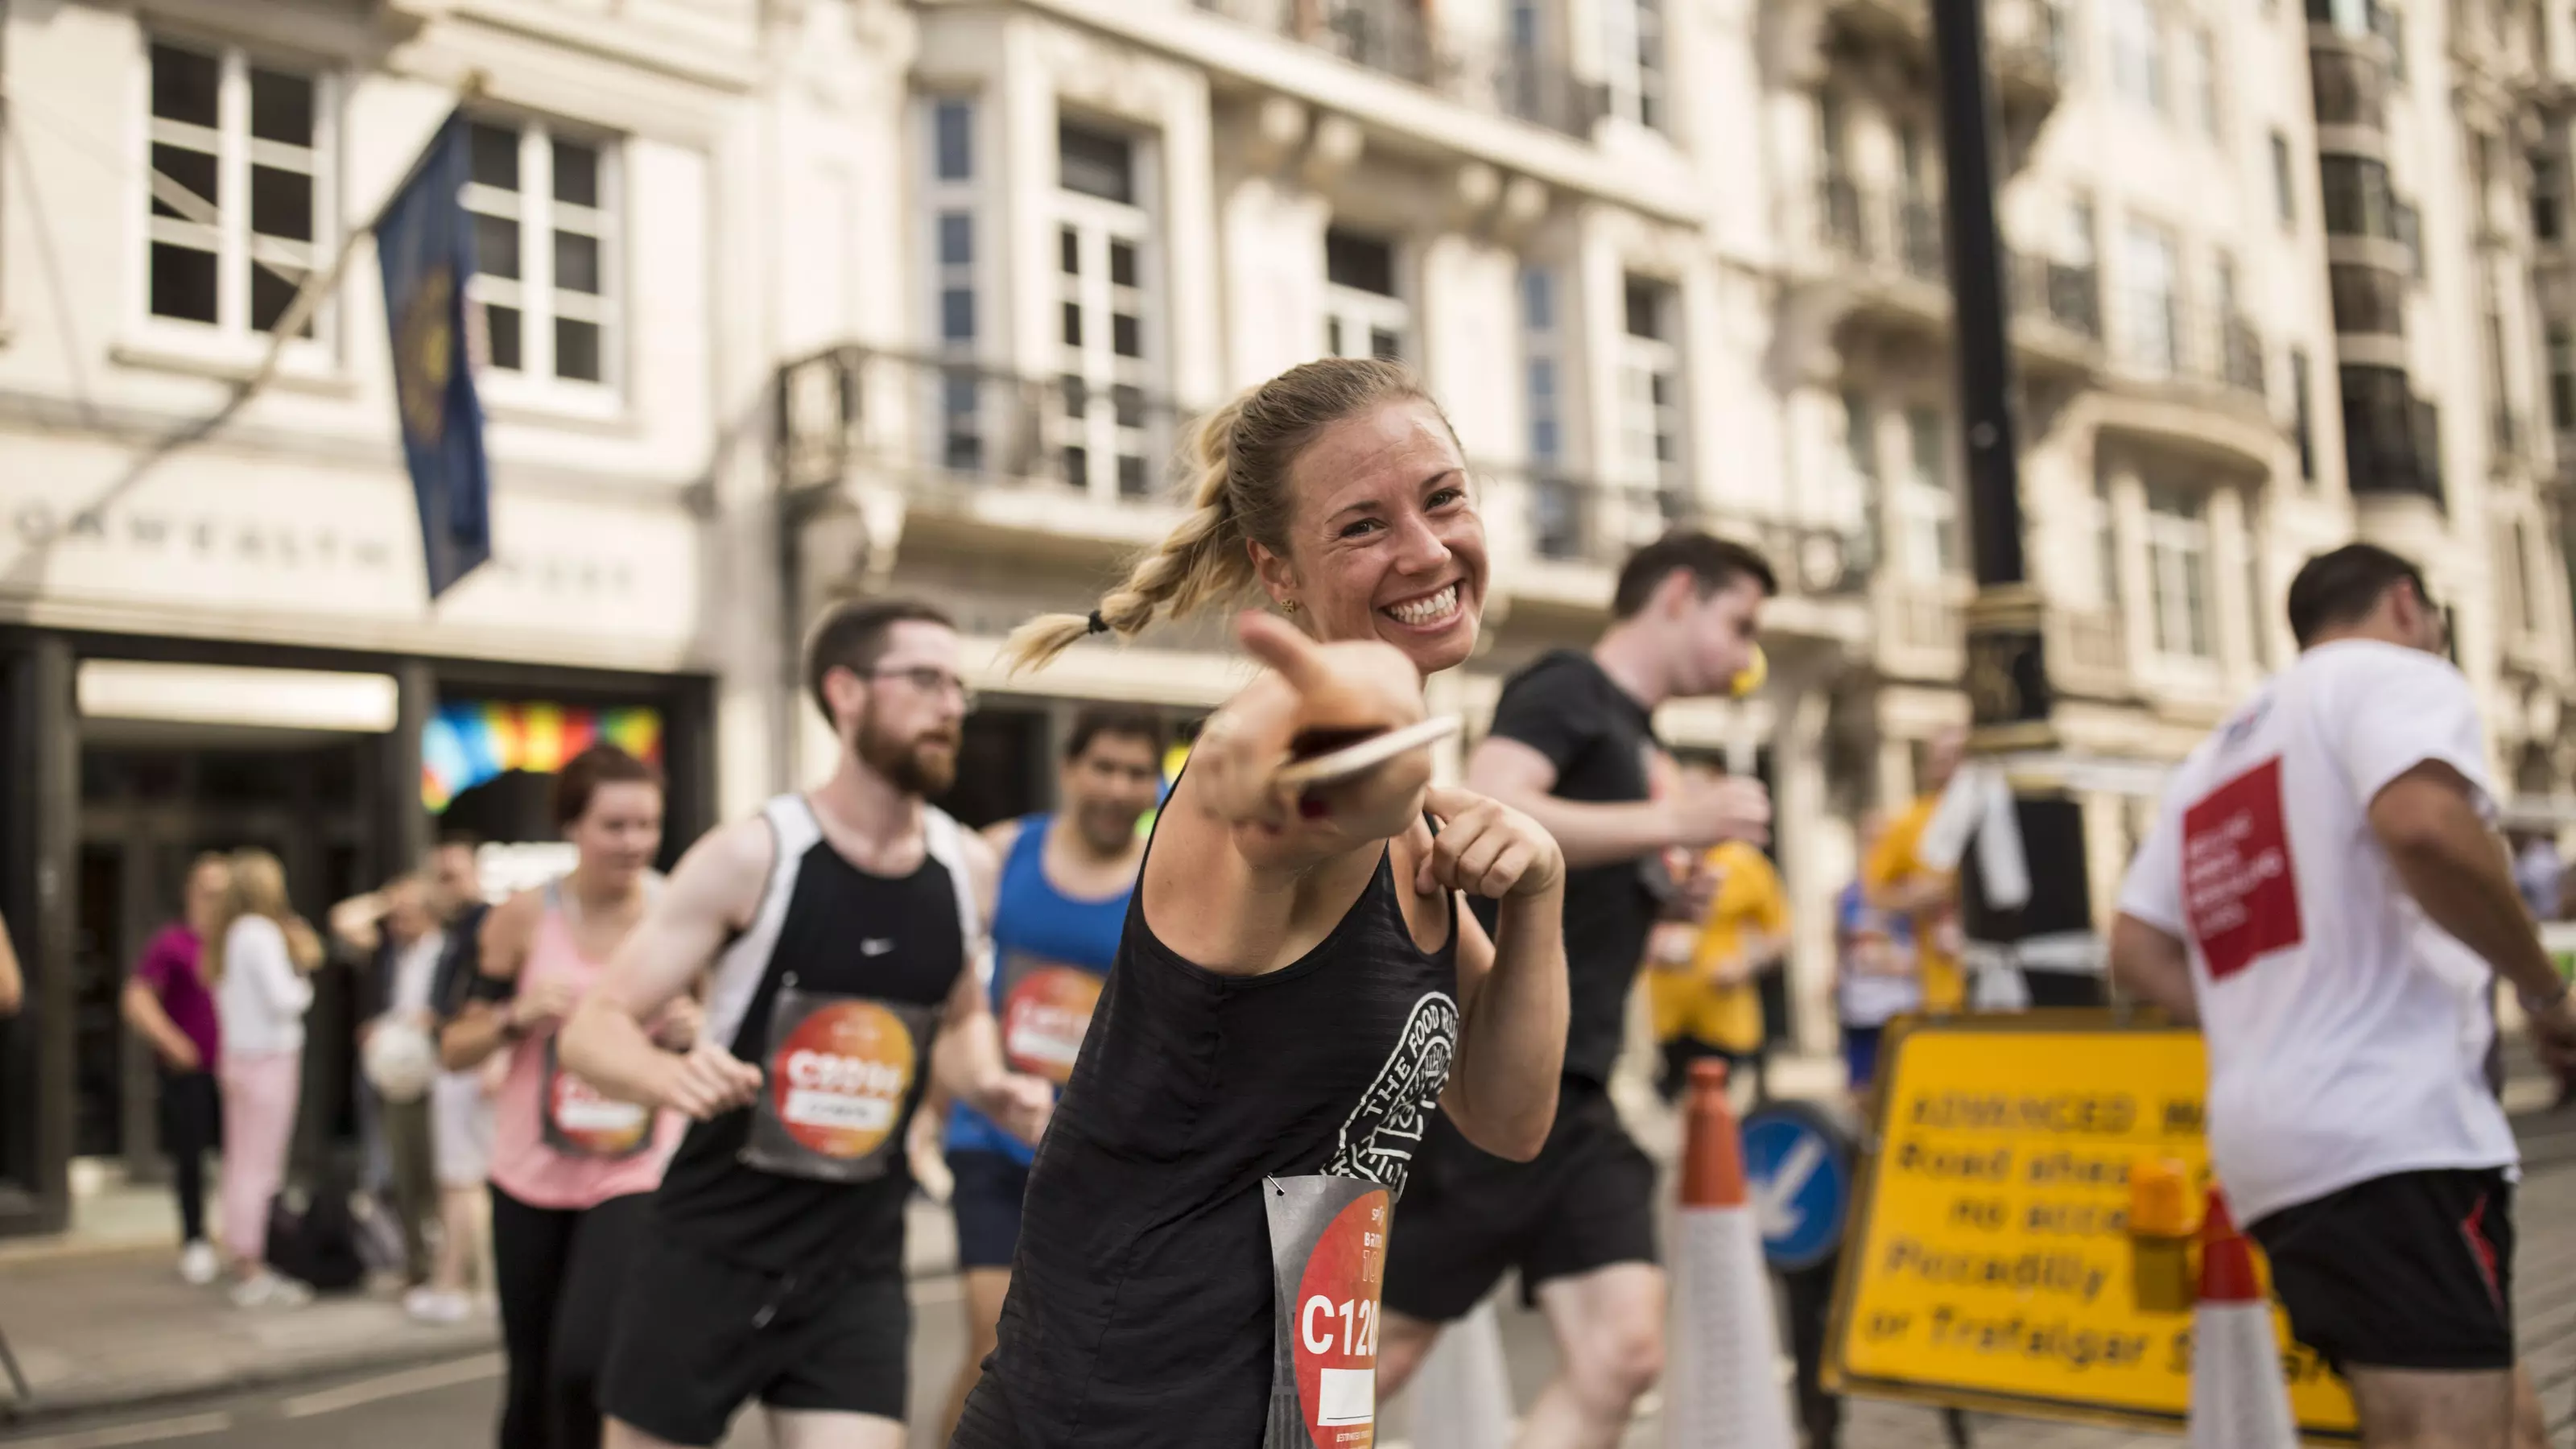 A lady running through Westminster, London, as part of the Asics London 10k race